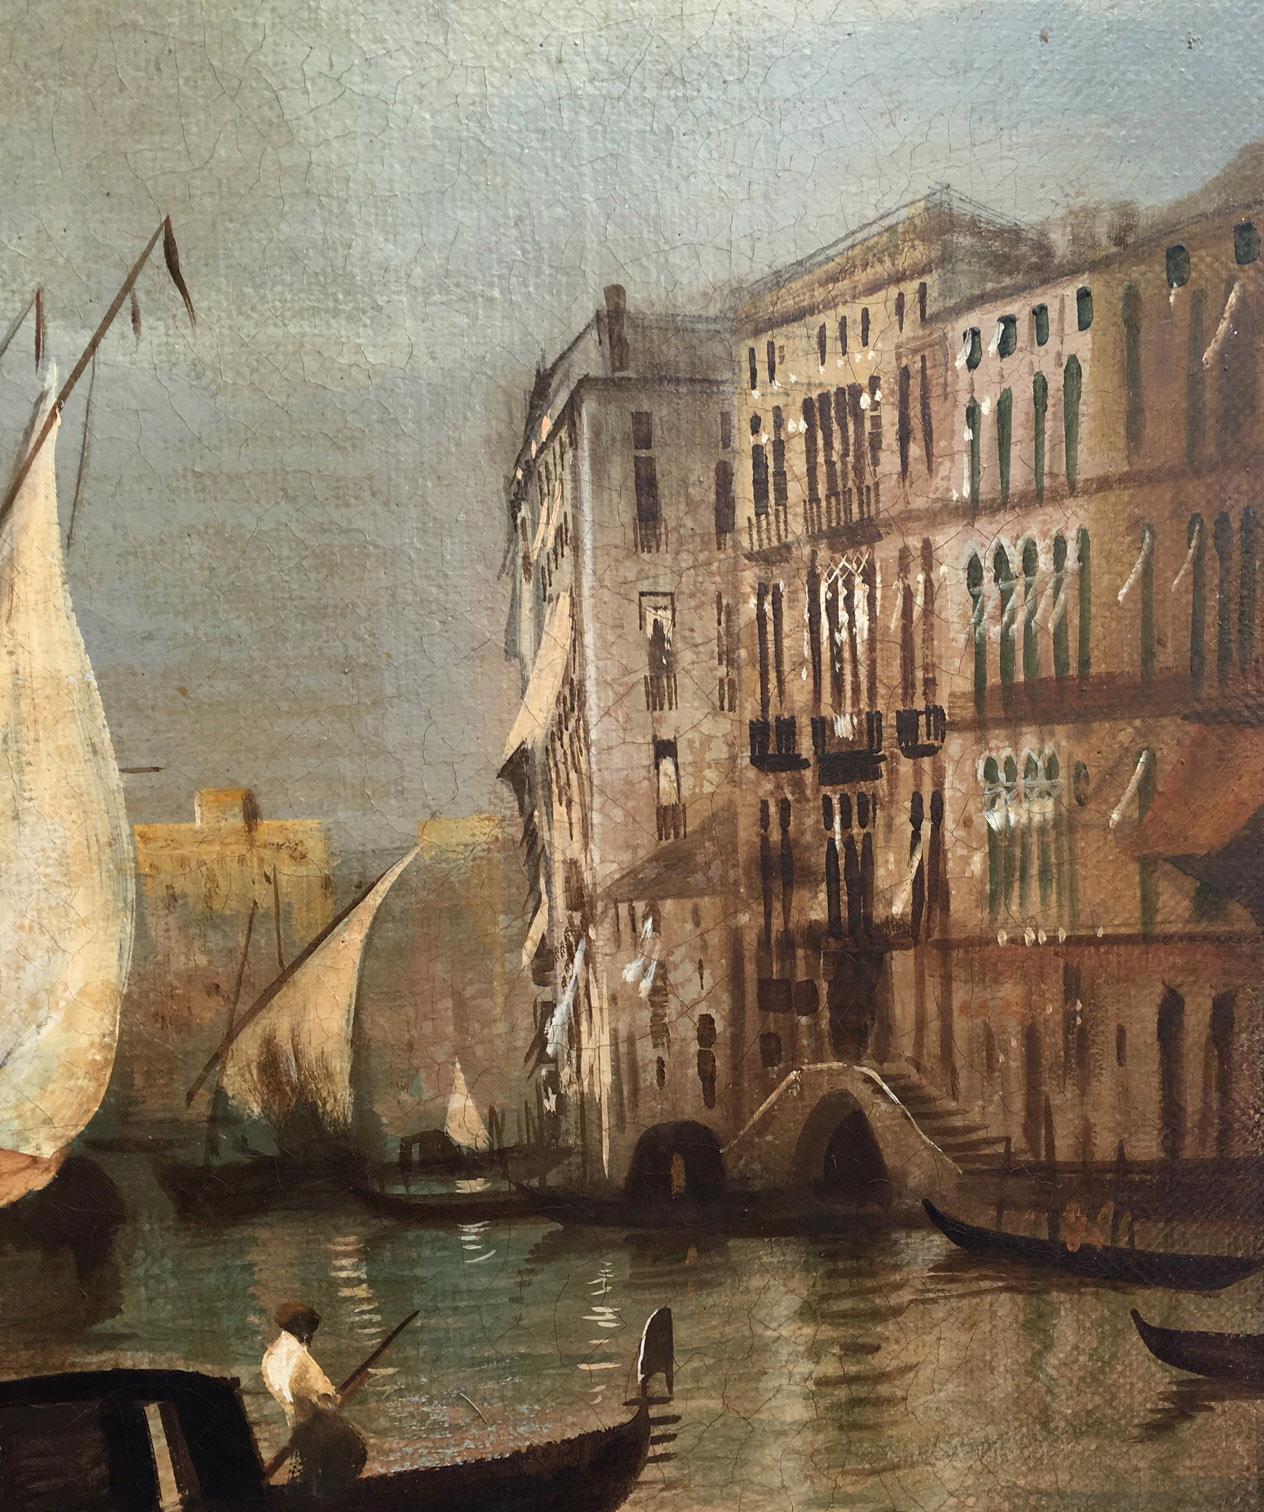 VENICE SAN GIORGIO ISLAND- In the Manner of Canaletto - Oil on Canvas Painting - Brown Landscape Painting by Giancarlo Gorini